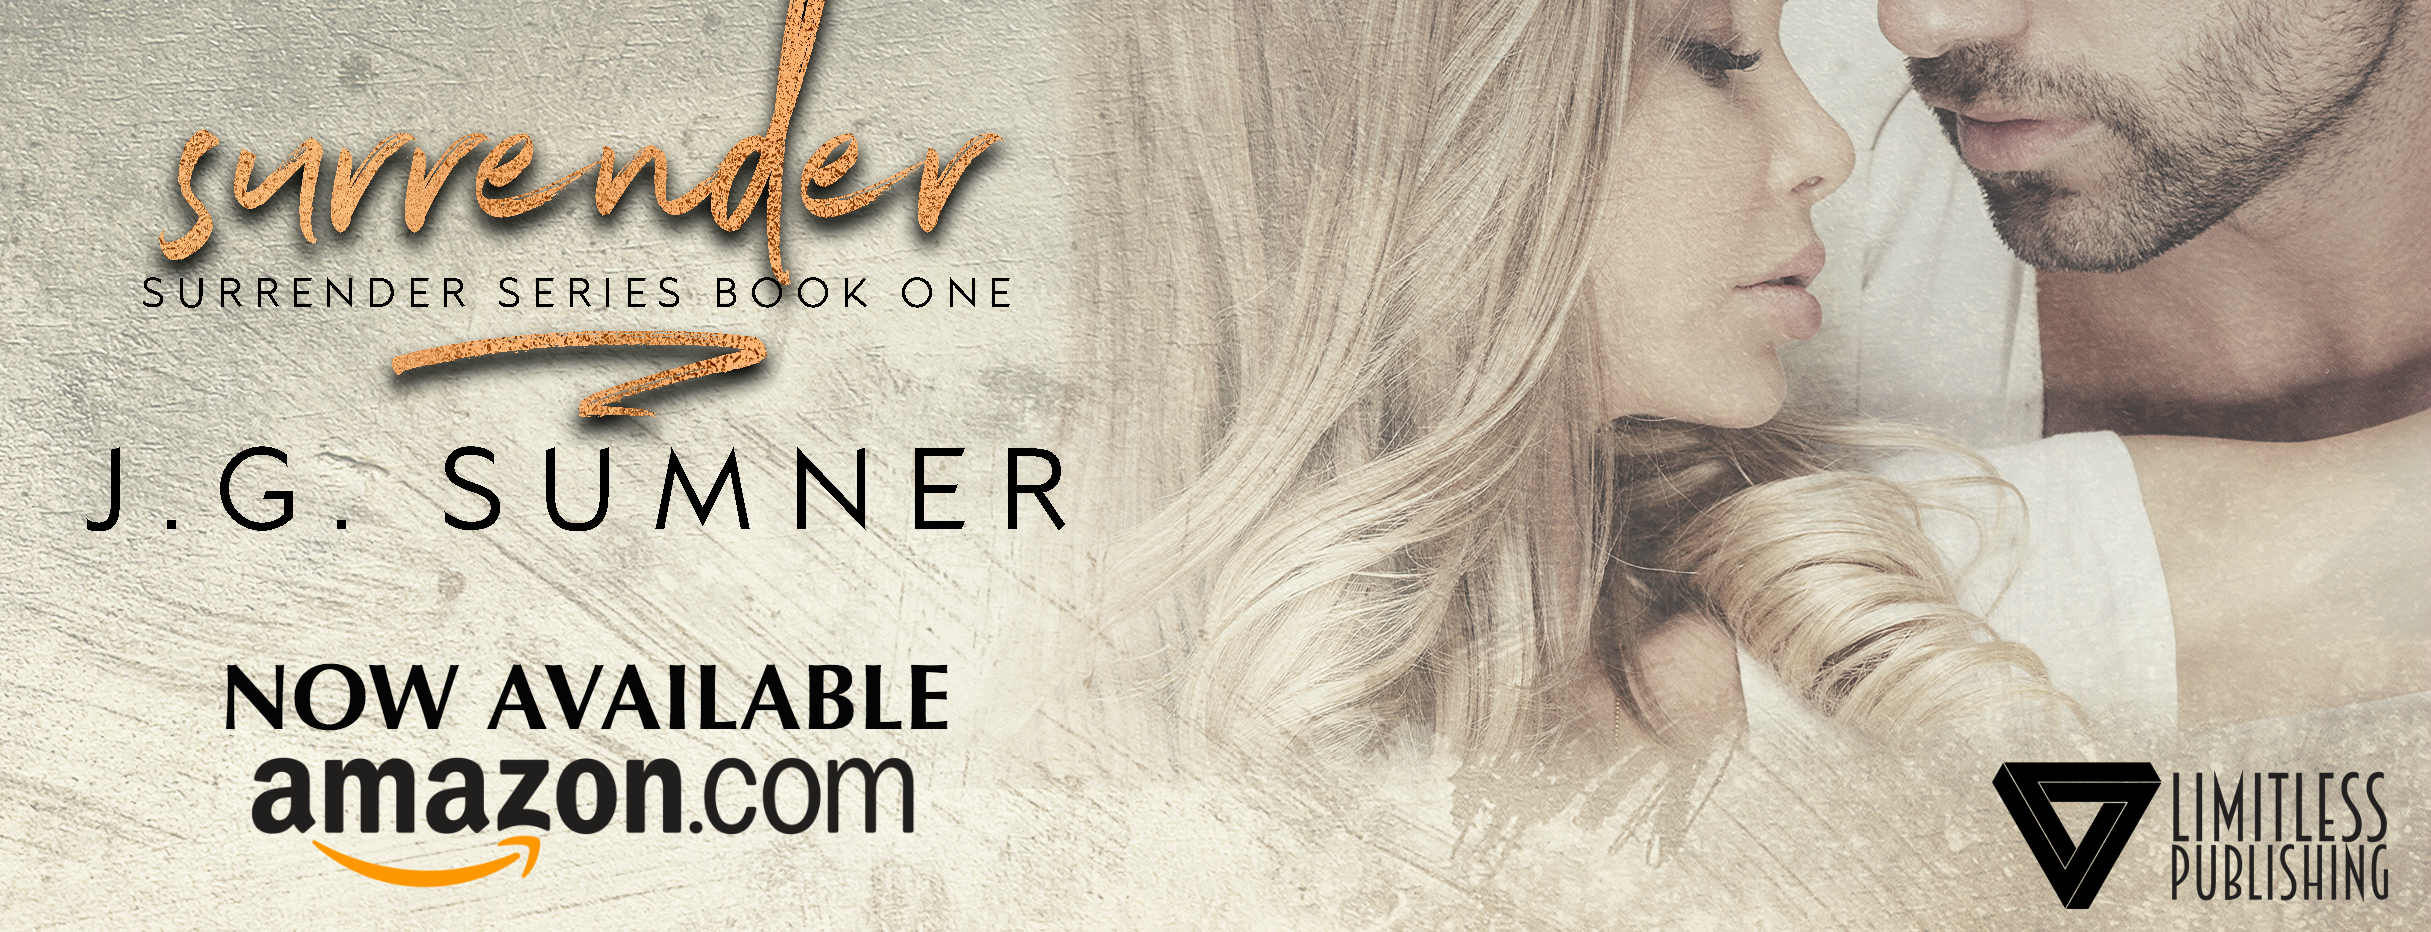 Surrender NOW AVAILABLE promo